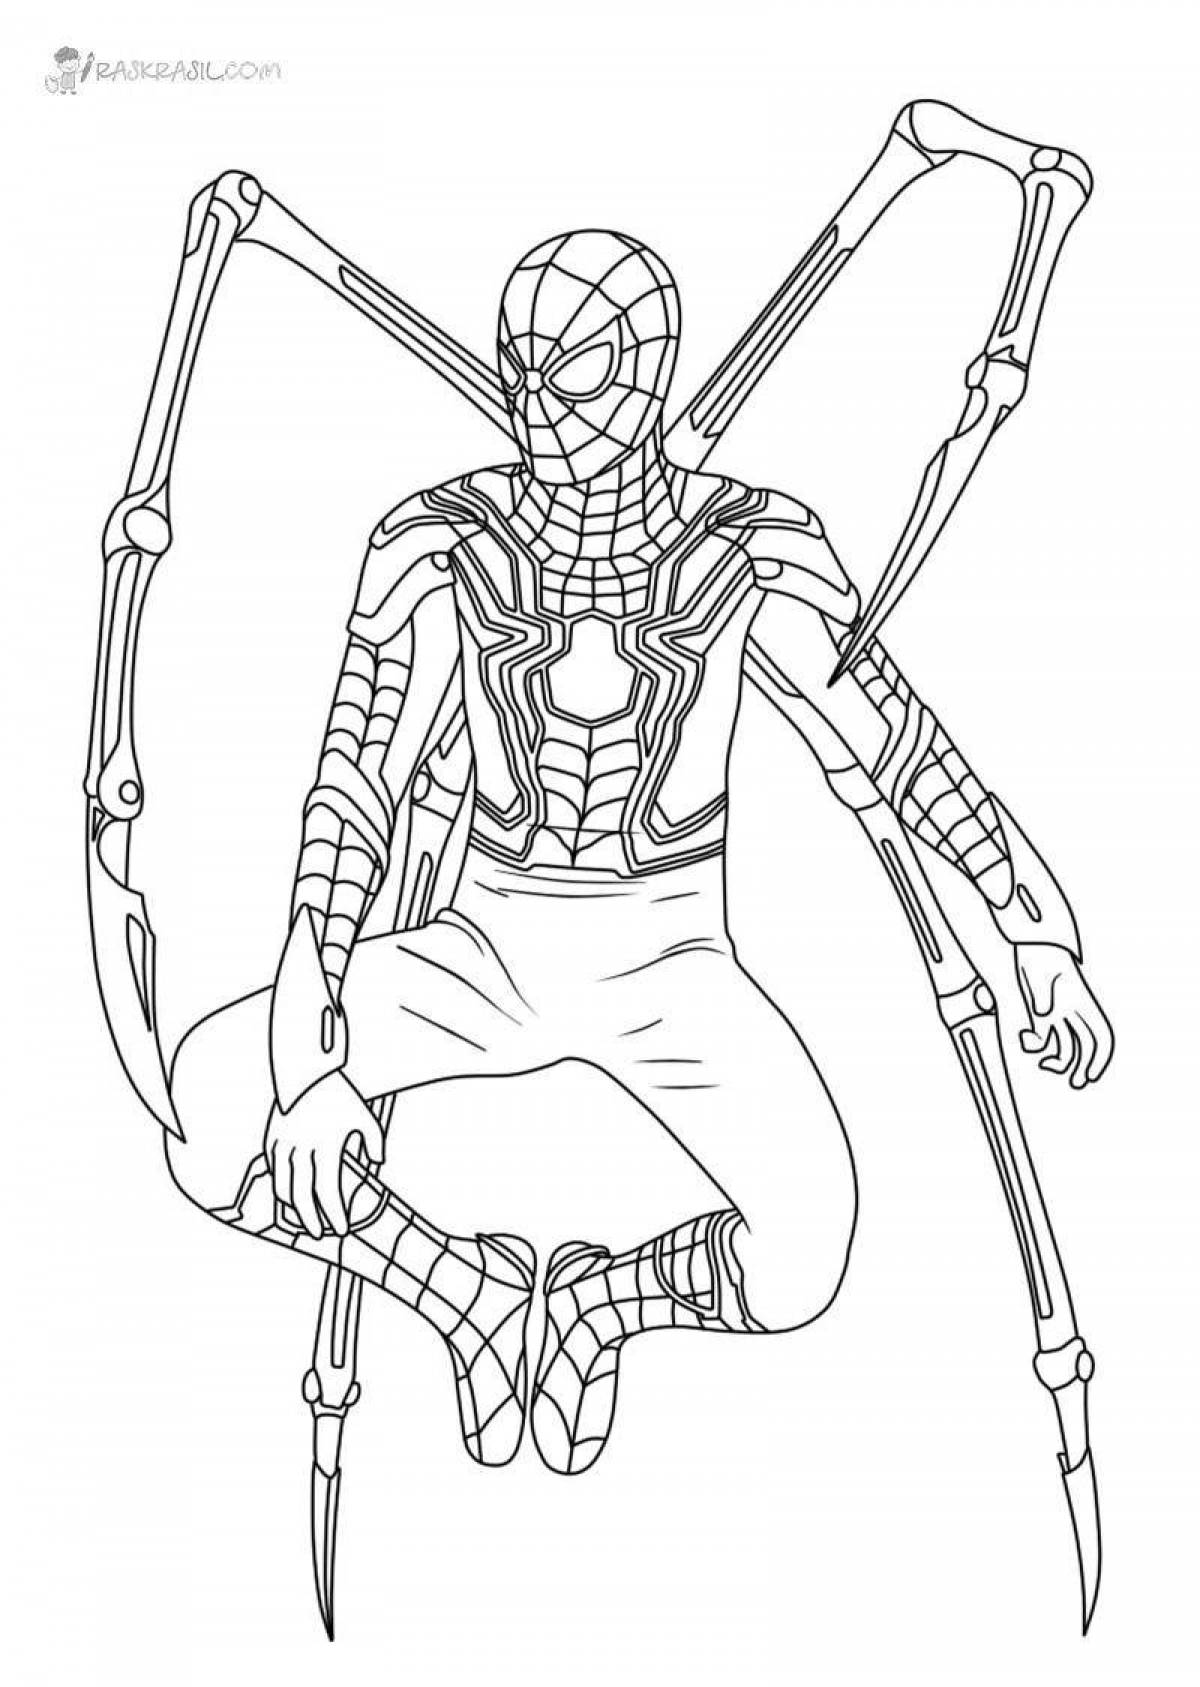 Impressive coloring book spider-man with claws